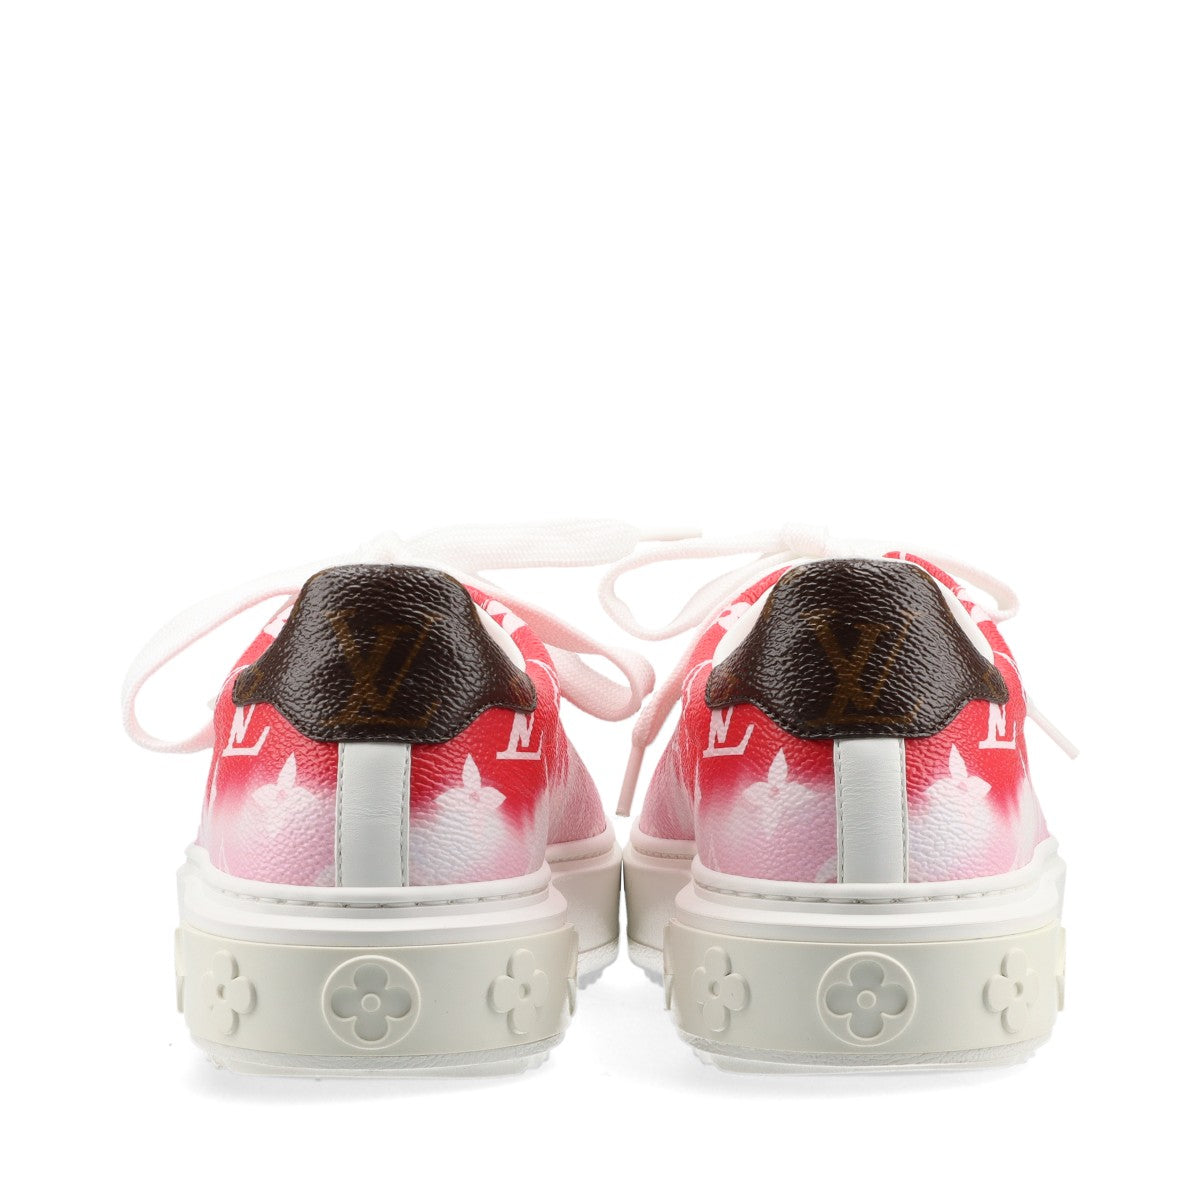 Louis Vuitton Timeout line 19-year PVC & leather Sneakers 35 Ladies' Red x white CL1119 Monogram